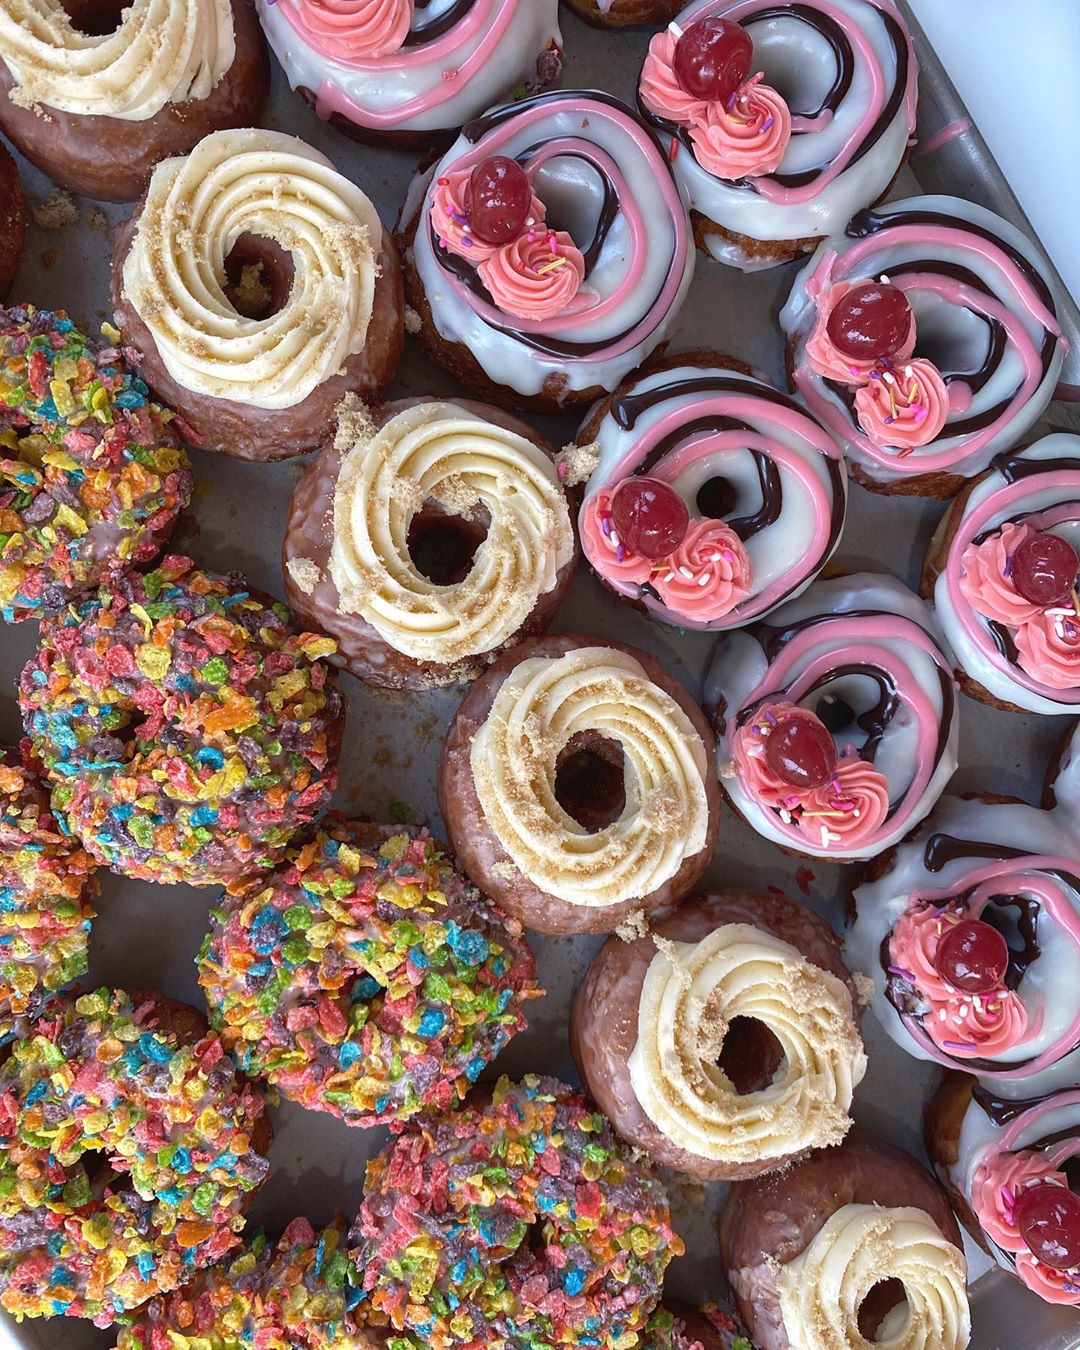 Donuts topped with fruity pebbles, cream cheese frosting and cherries from PV Donuts photo by Instagram user @pvdonuts